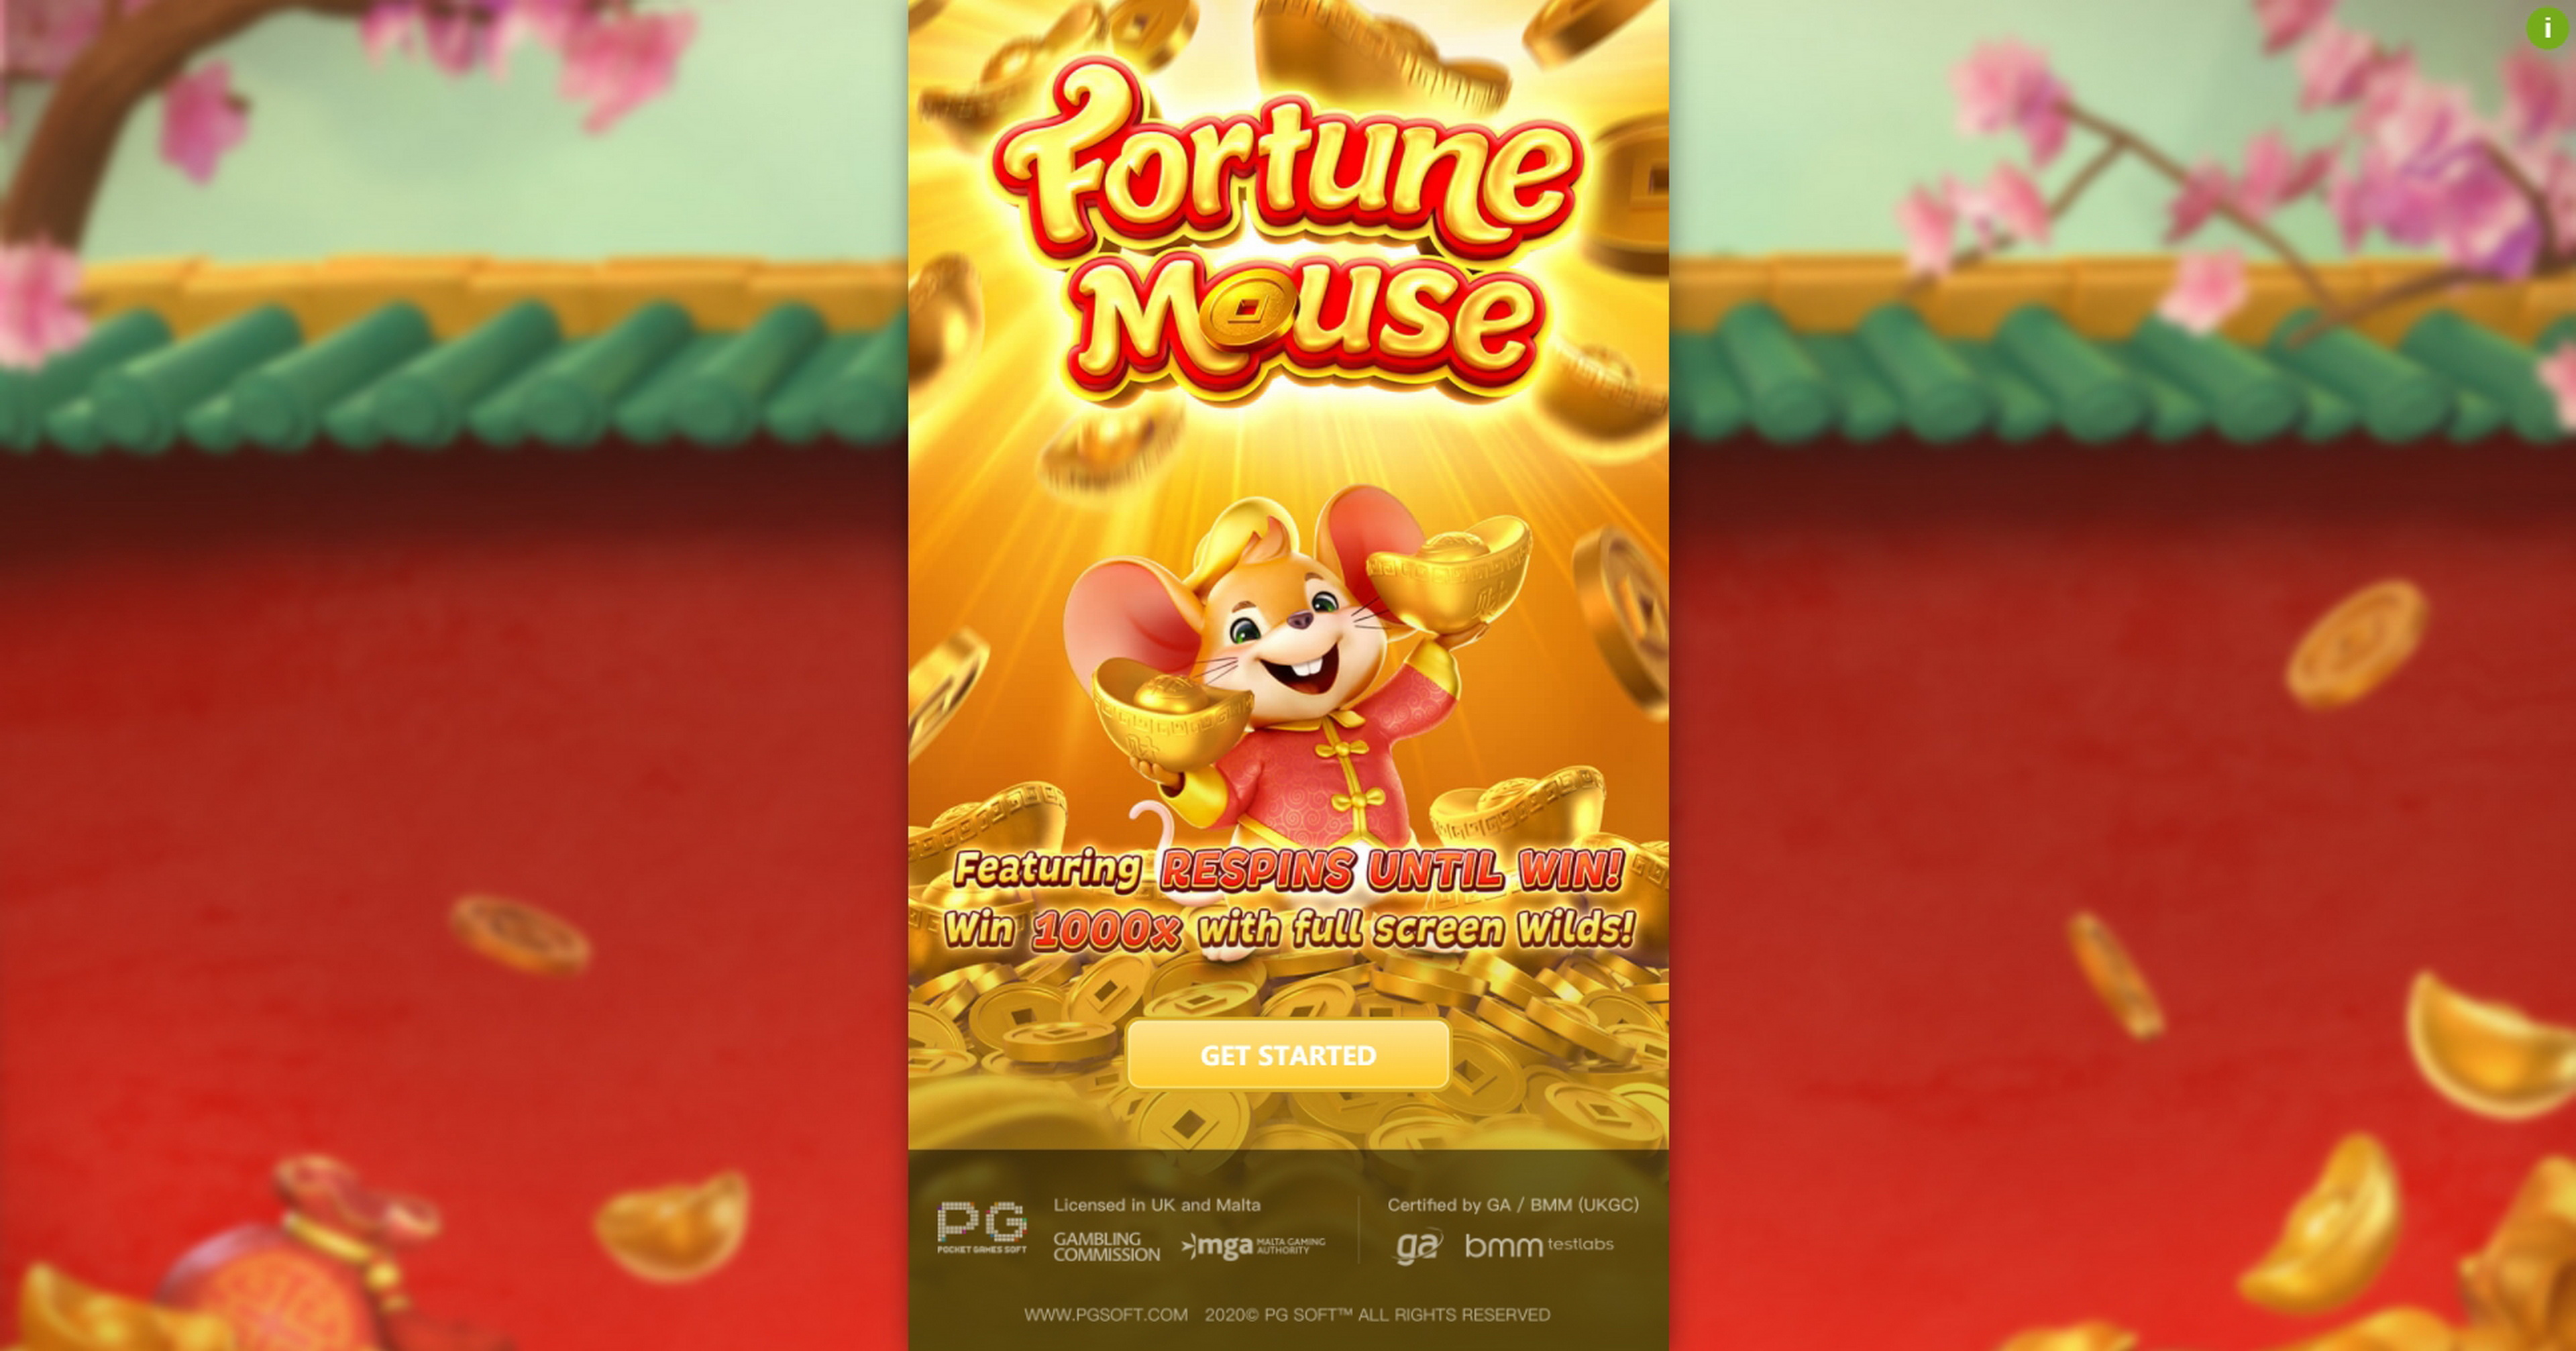 Play Fortune Mouse Free Casino Slot Game by PG Soft